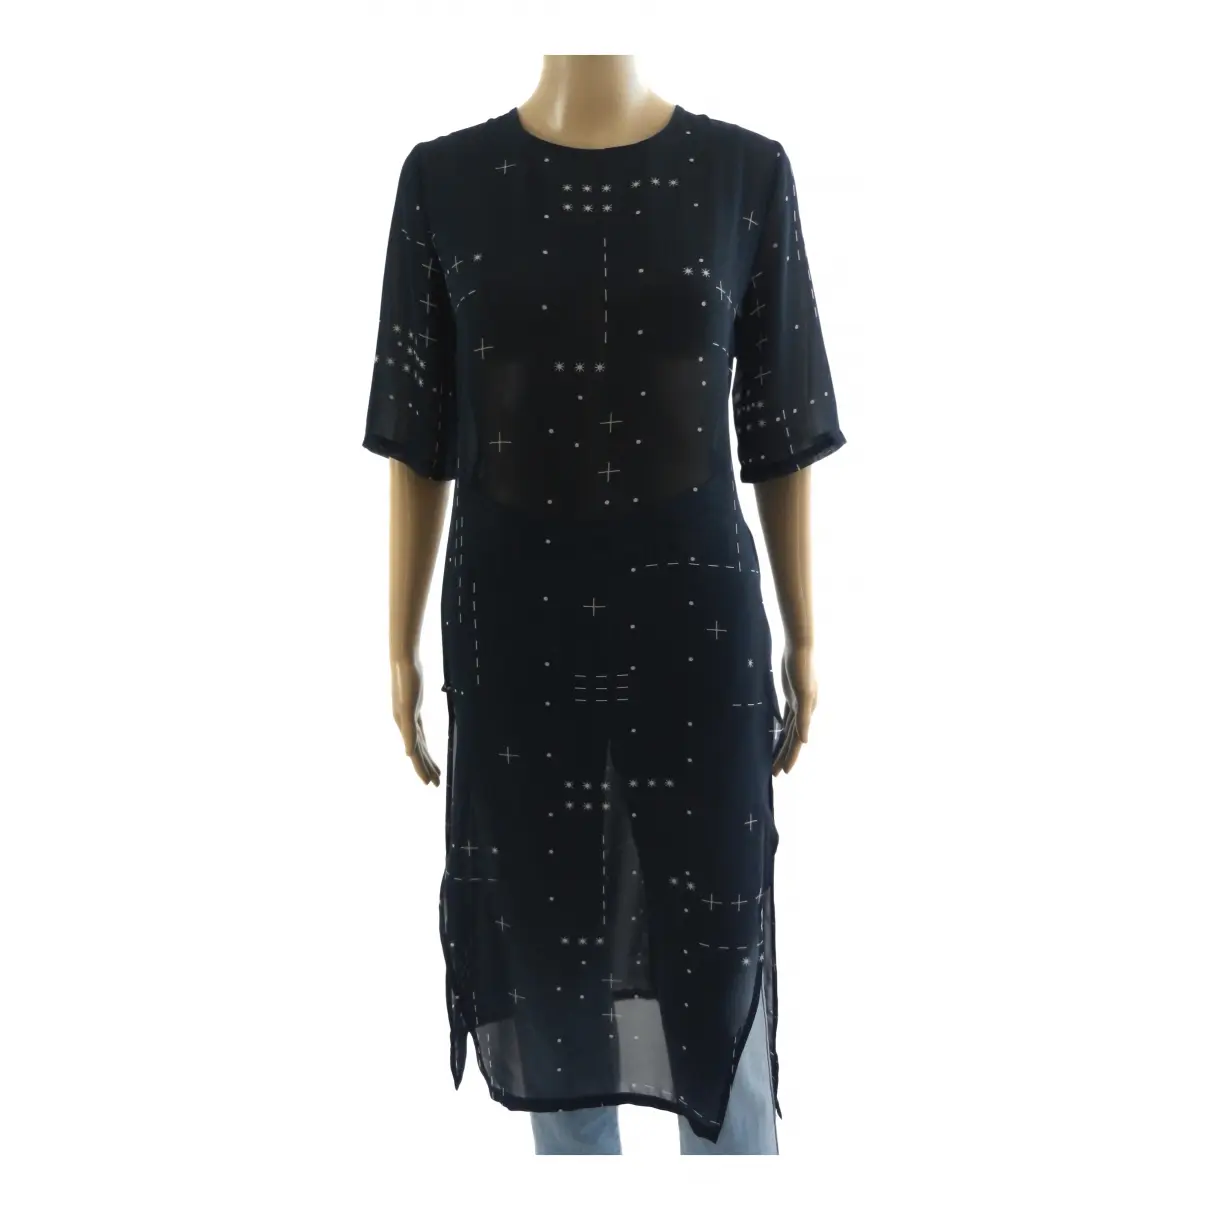 Buy The Fifth Label Tunic online